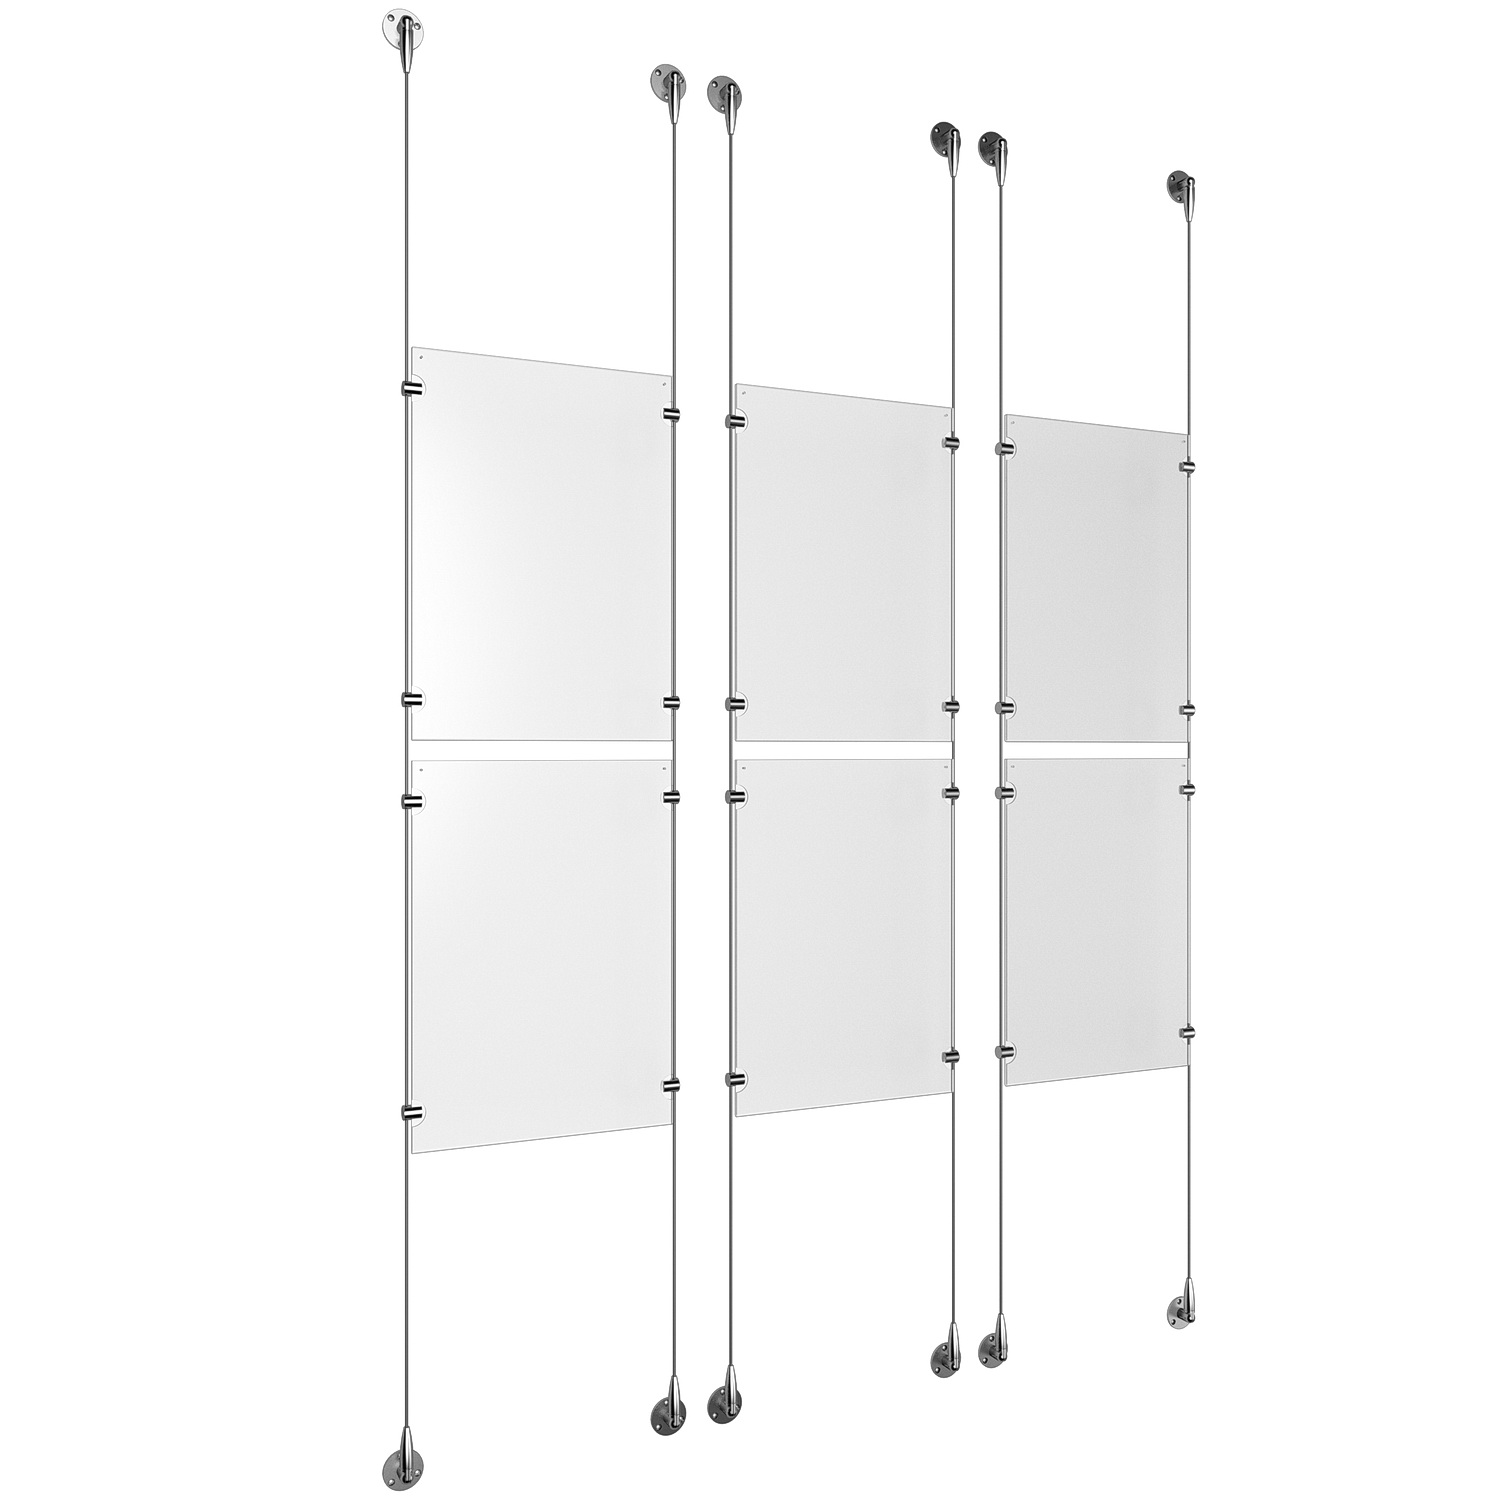 (6) 11'' Width x 17'' Height Clear Acrylic Frame & (6) Aluminum Clear Anodized Adjustable Angle Signature 1/8'' Diameter Cable Systems with (24) Single-Sided Panel Grippers